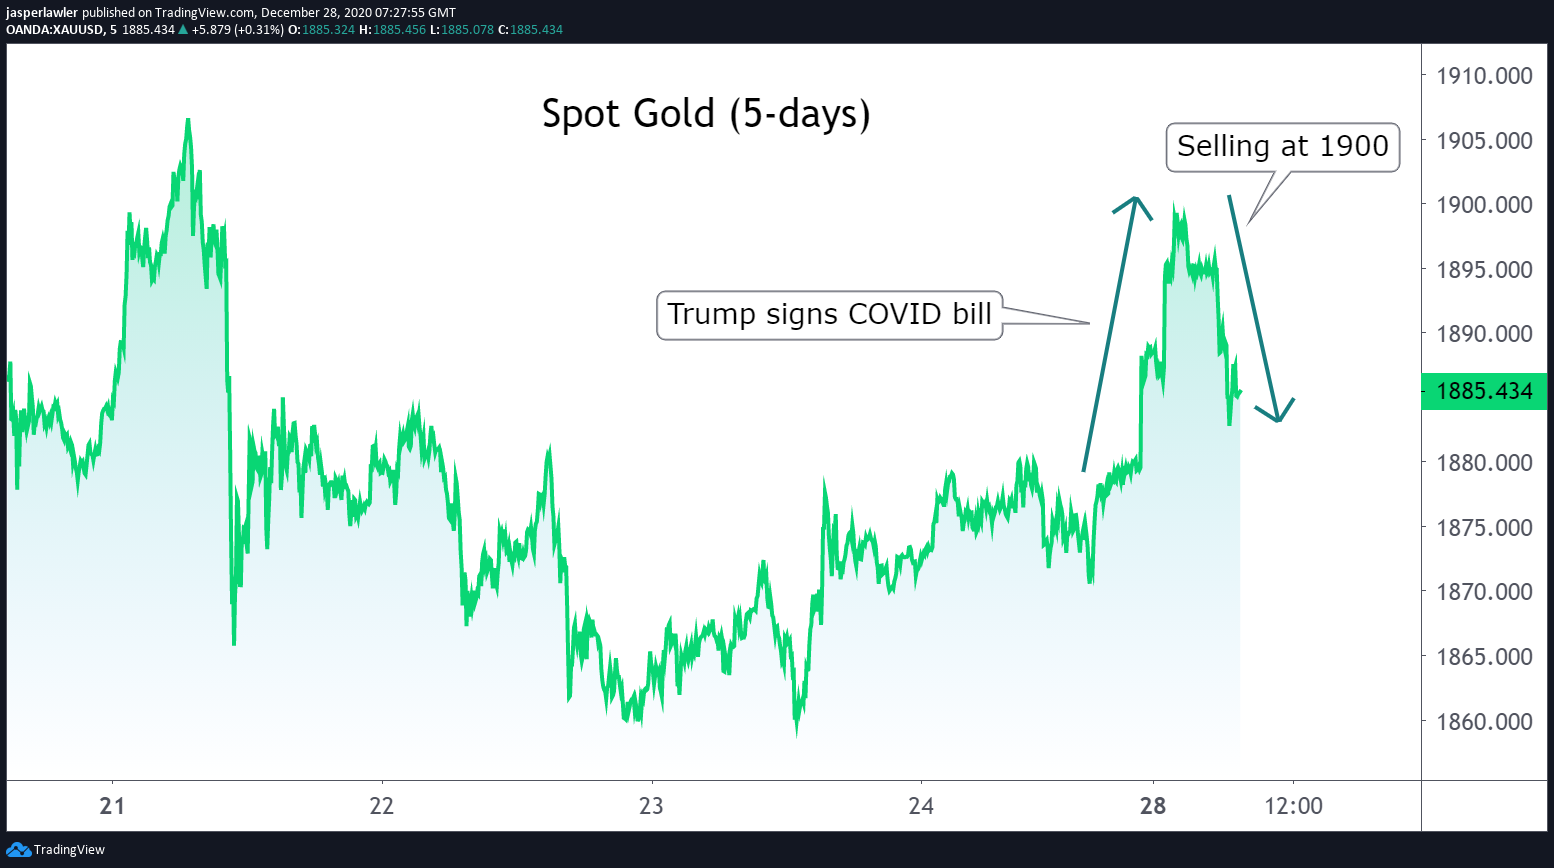 Gold pops after Trump signs COVID bill then drops from $1900